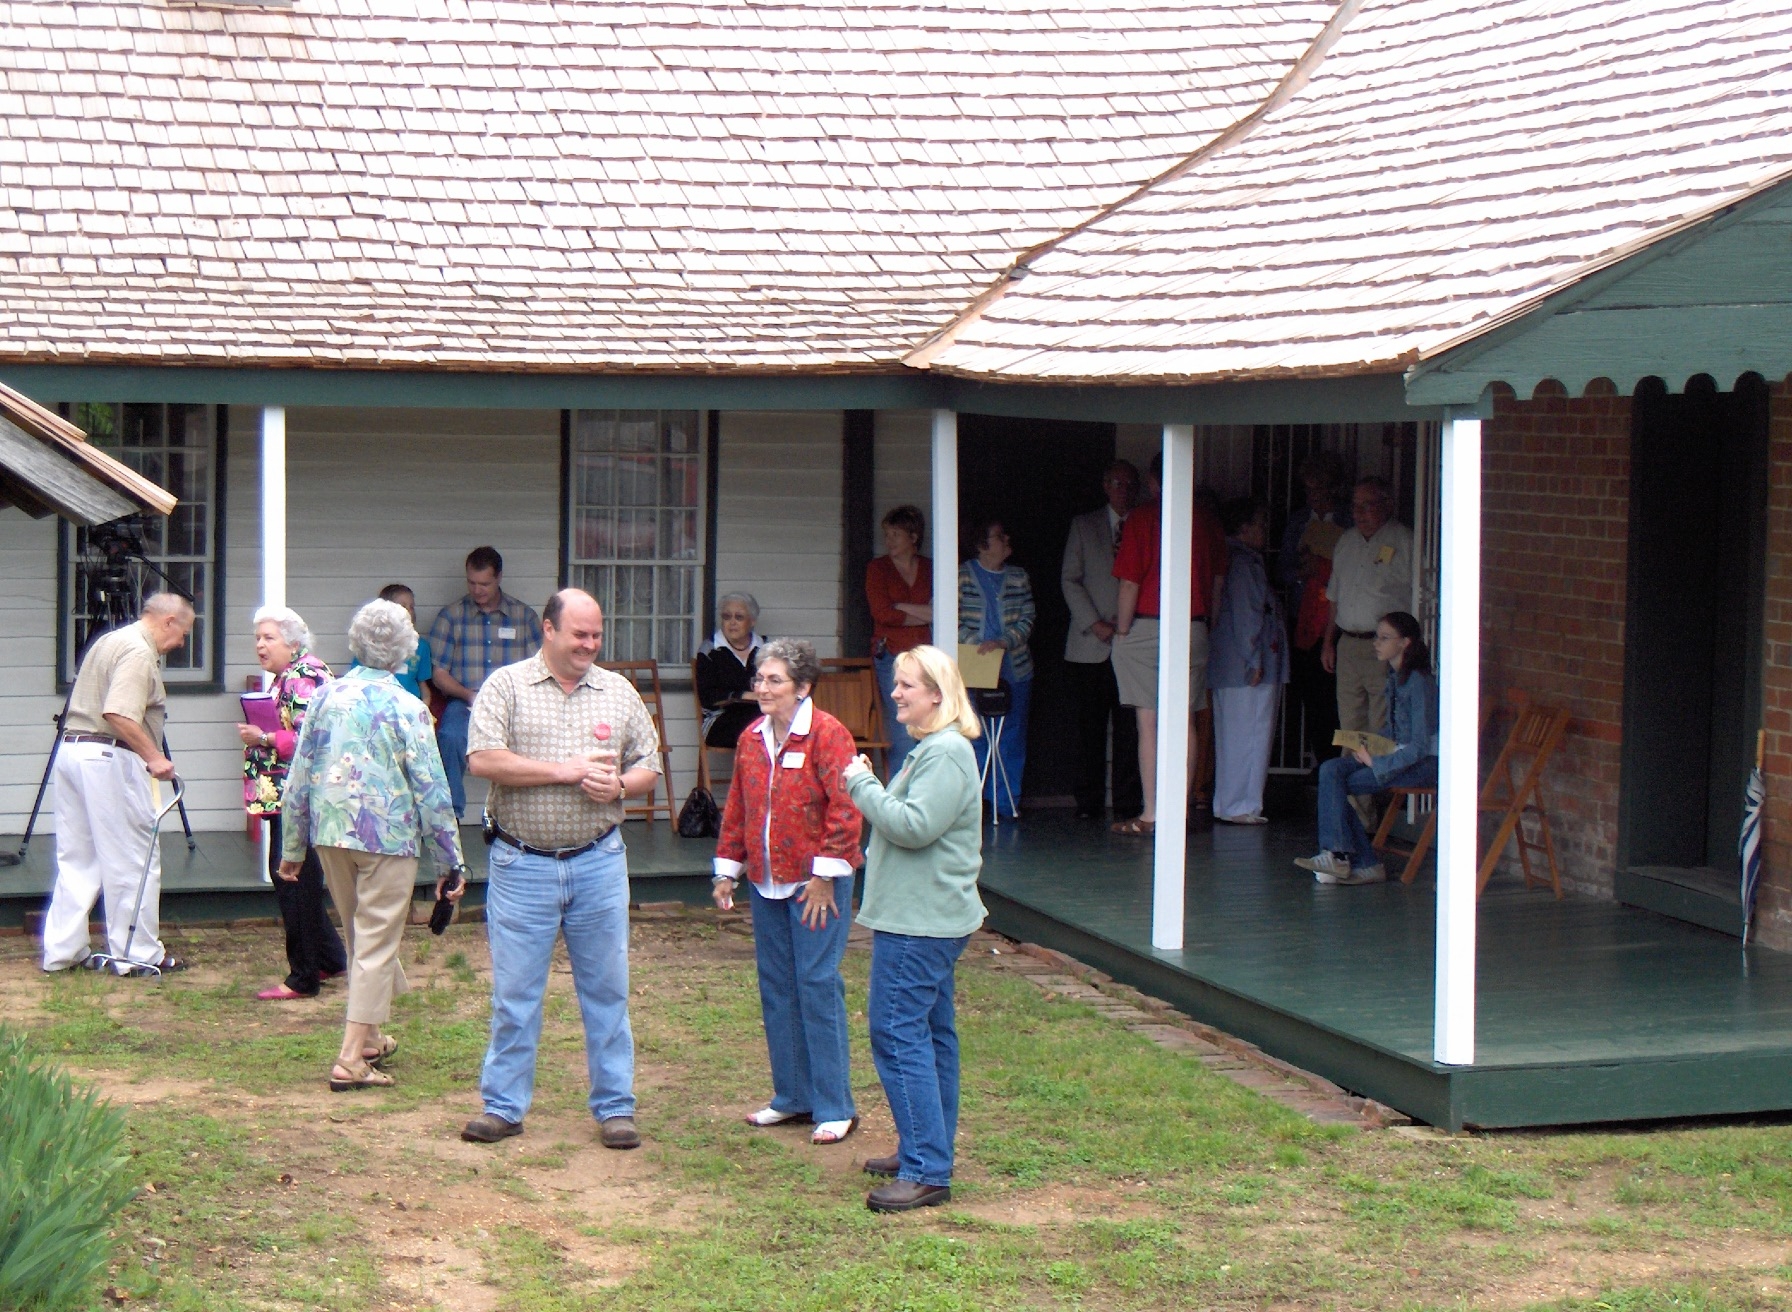 A celebration of the restoration of the roof at Shoppach House in Benton, Arkansas in 2006.